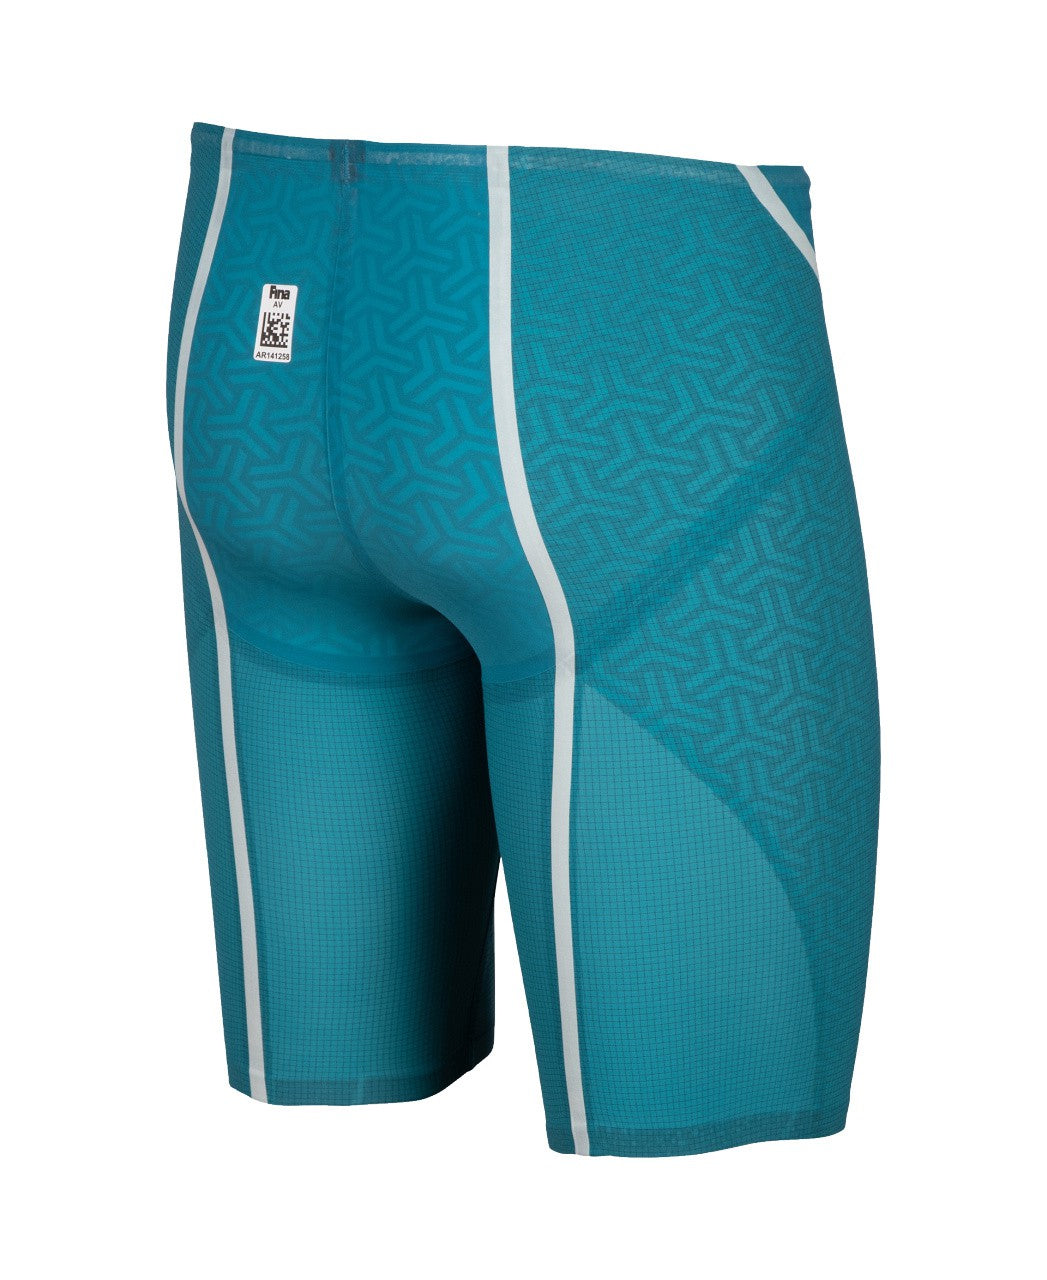 M Powerskin Carbon Glide LE Jammer calypso bay